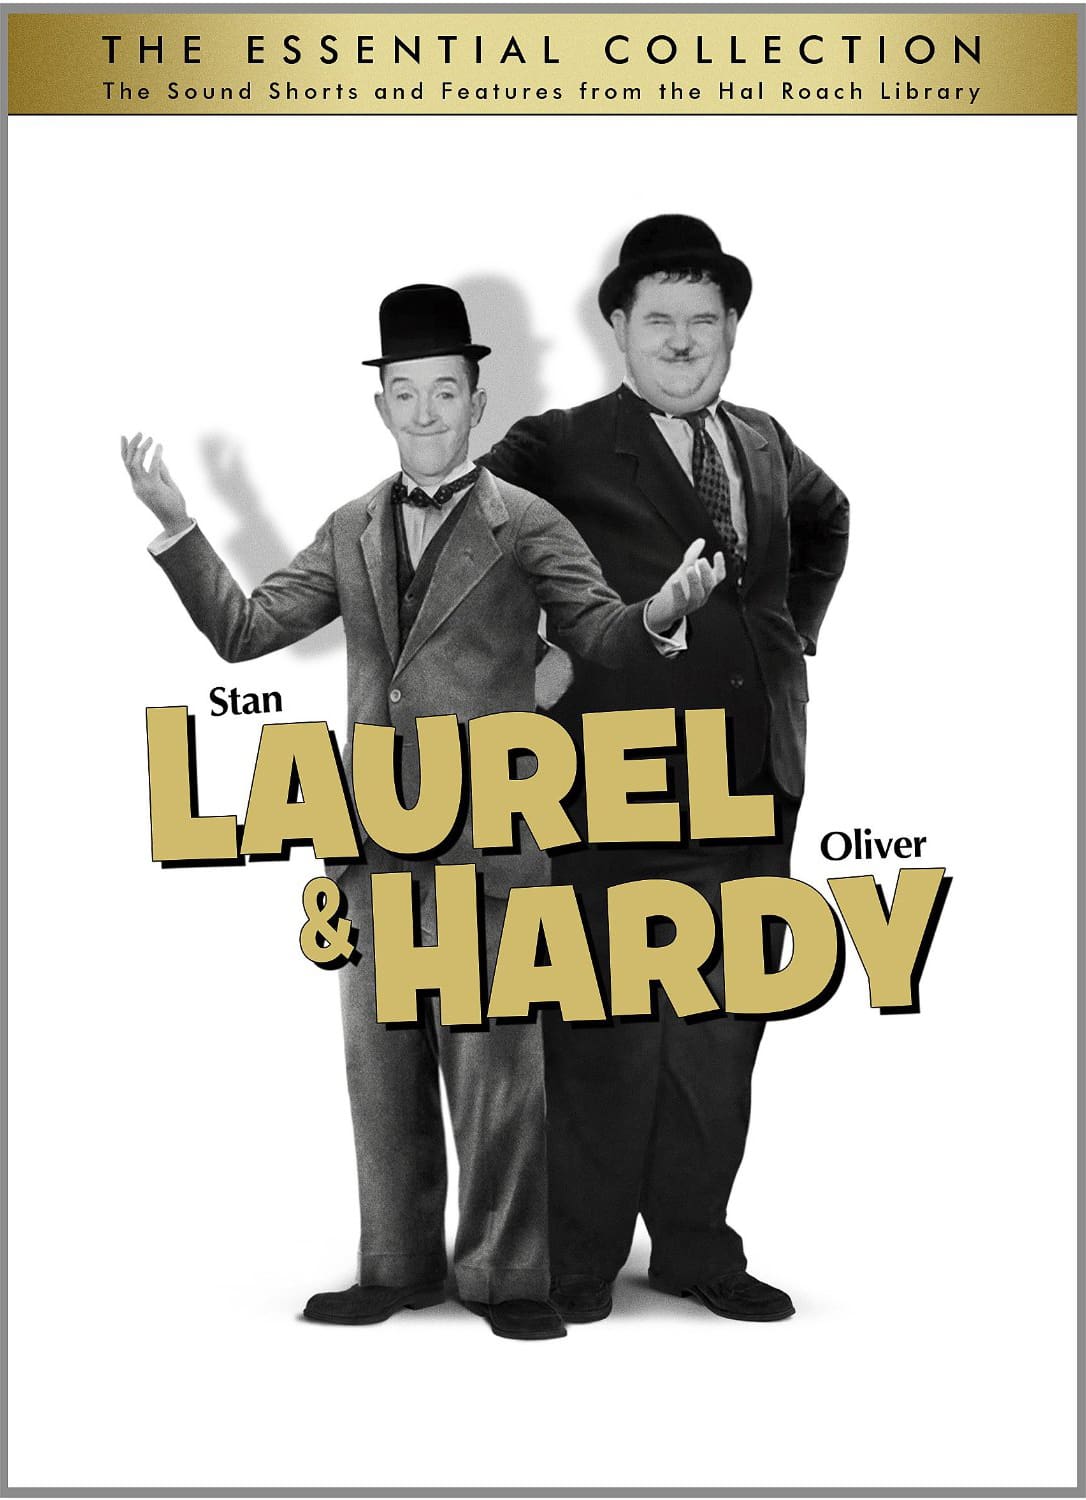 Poster for the movie "The Best of Laurel and Hardy"